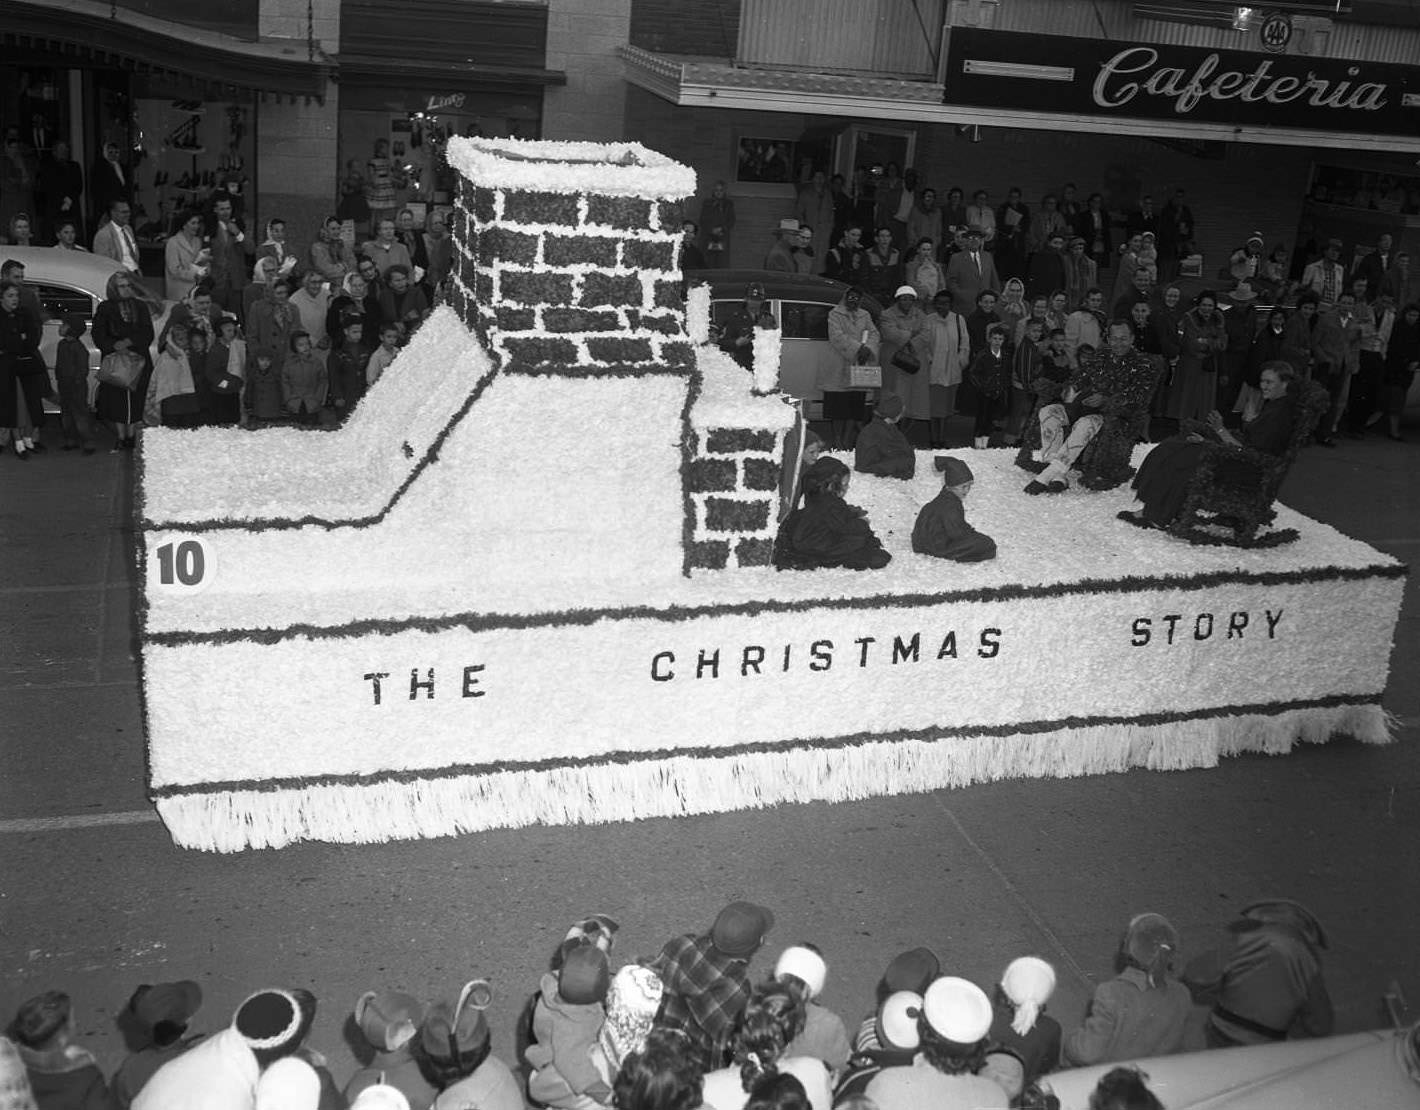 The Christmas Story float at a Christmas Parade in Abilene, 1956